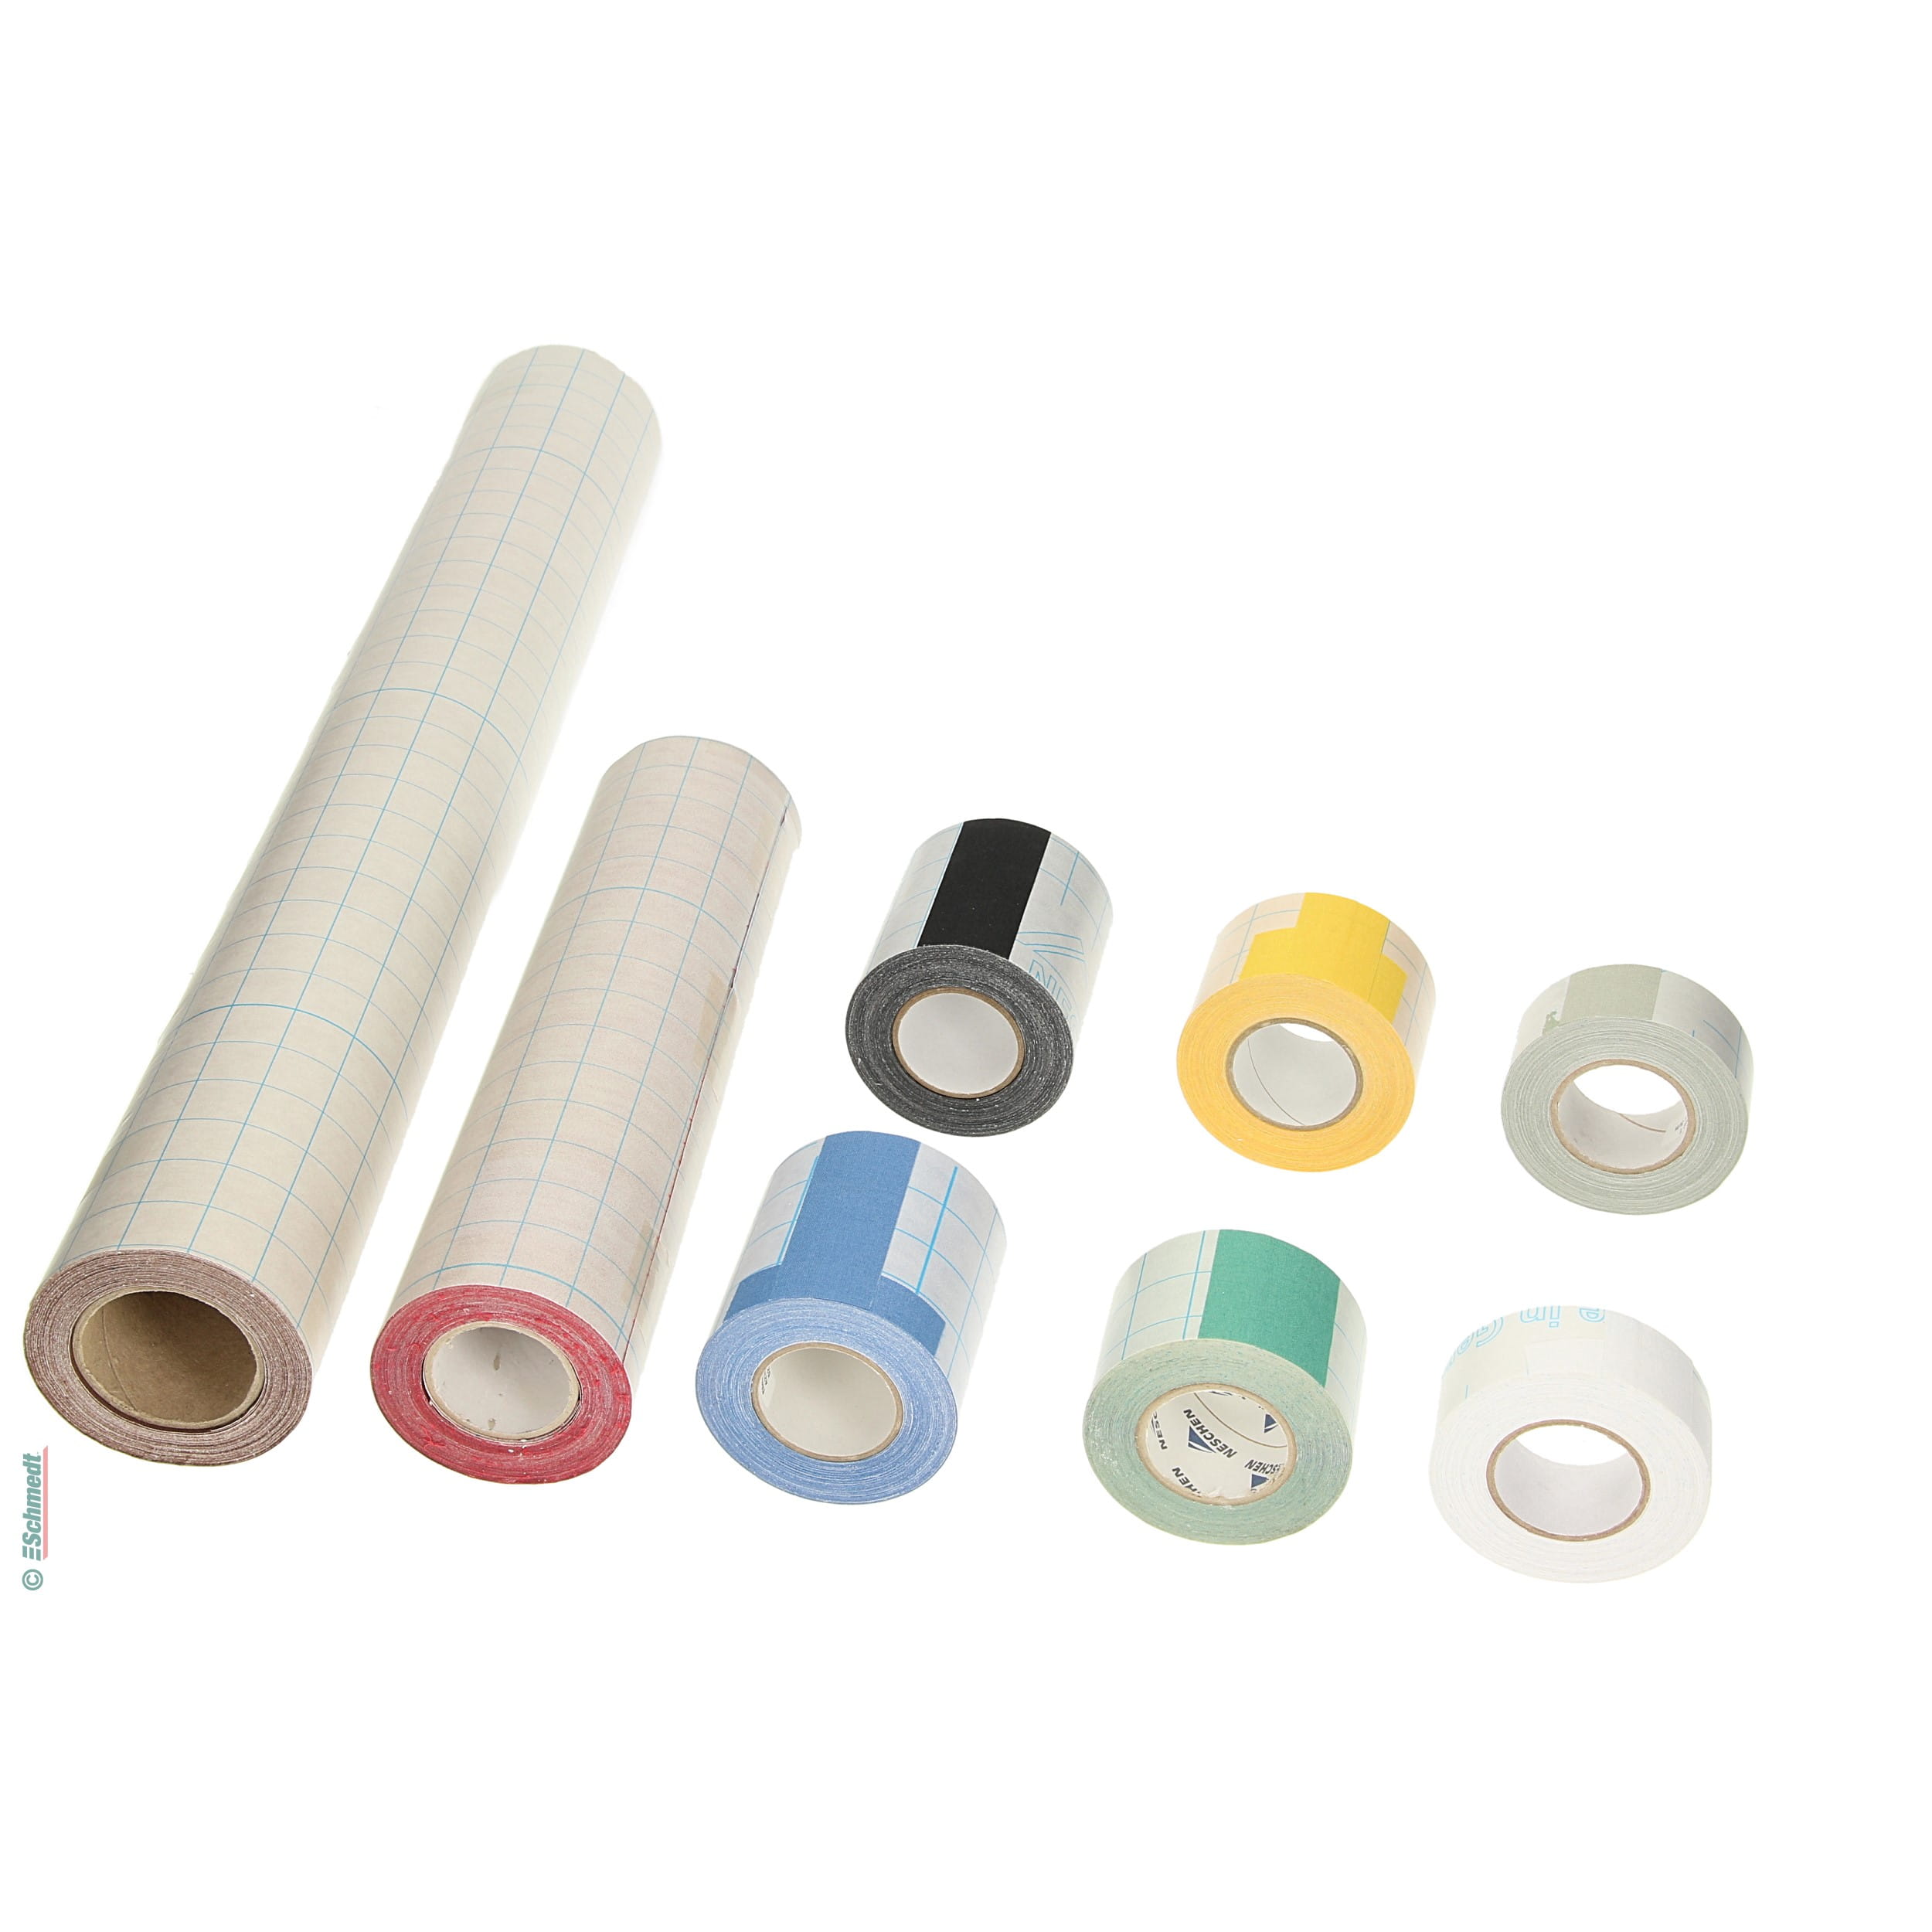 Book Binding Tape, Book Repair Tape 2 Inch Wide, Acid-Free, Easy to Use,  Flexible Book Binding Material, Bookbinding Kit, Book Tape for Reinforcing